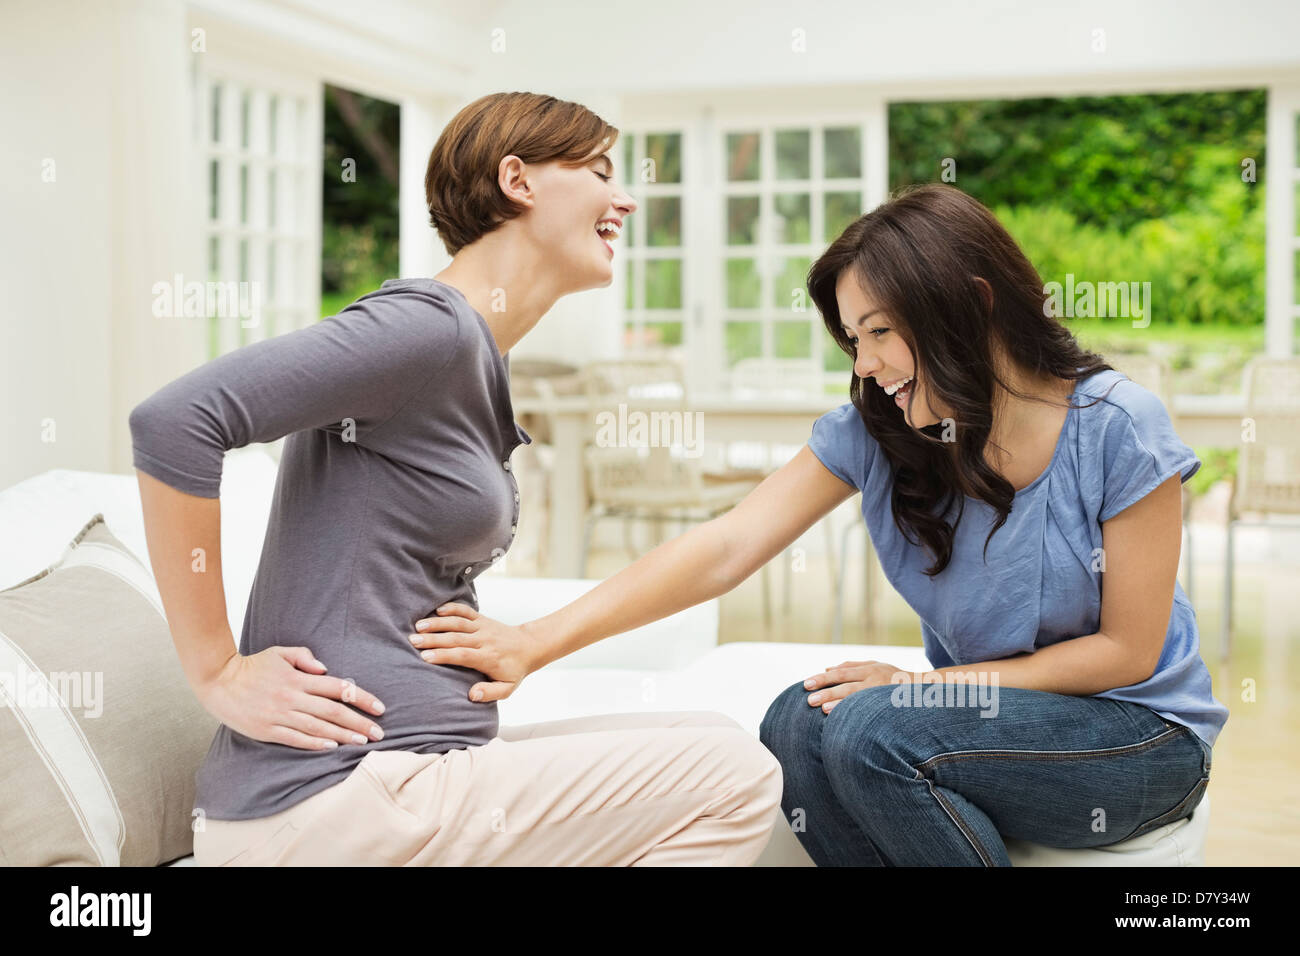 Woman holding pregnant friend's belly Banque D'Images